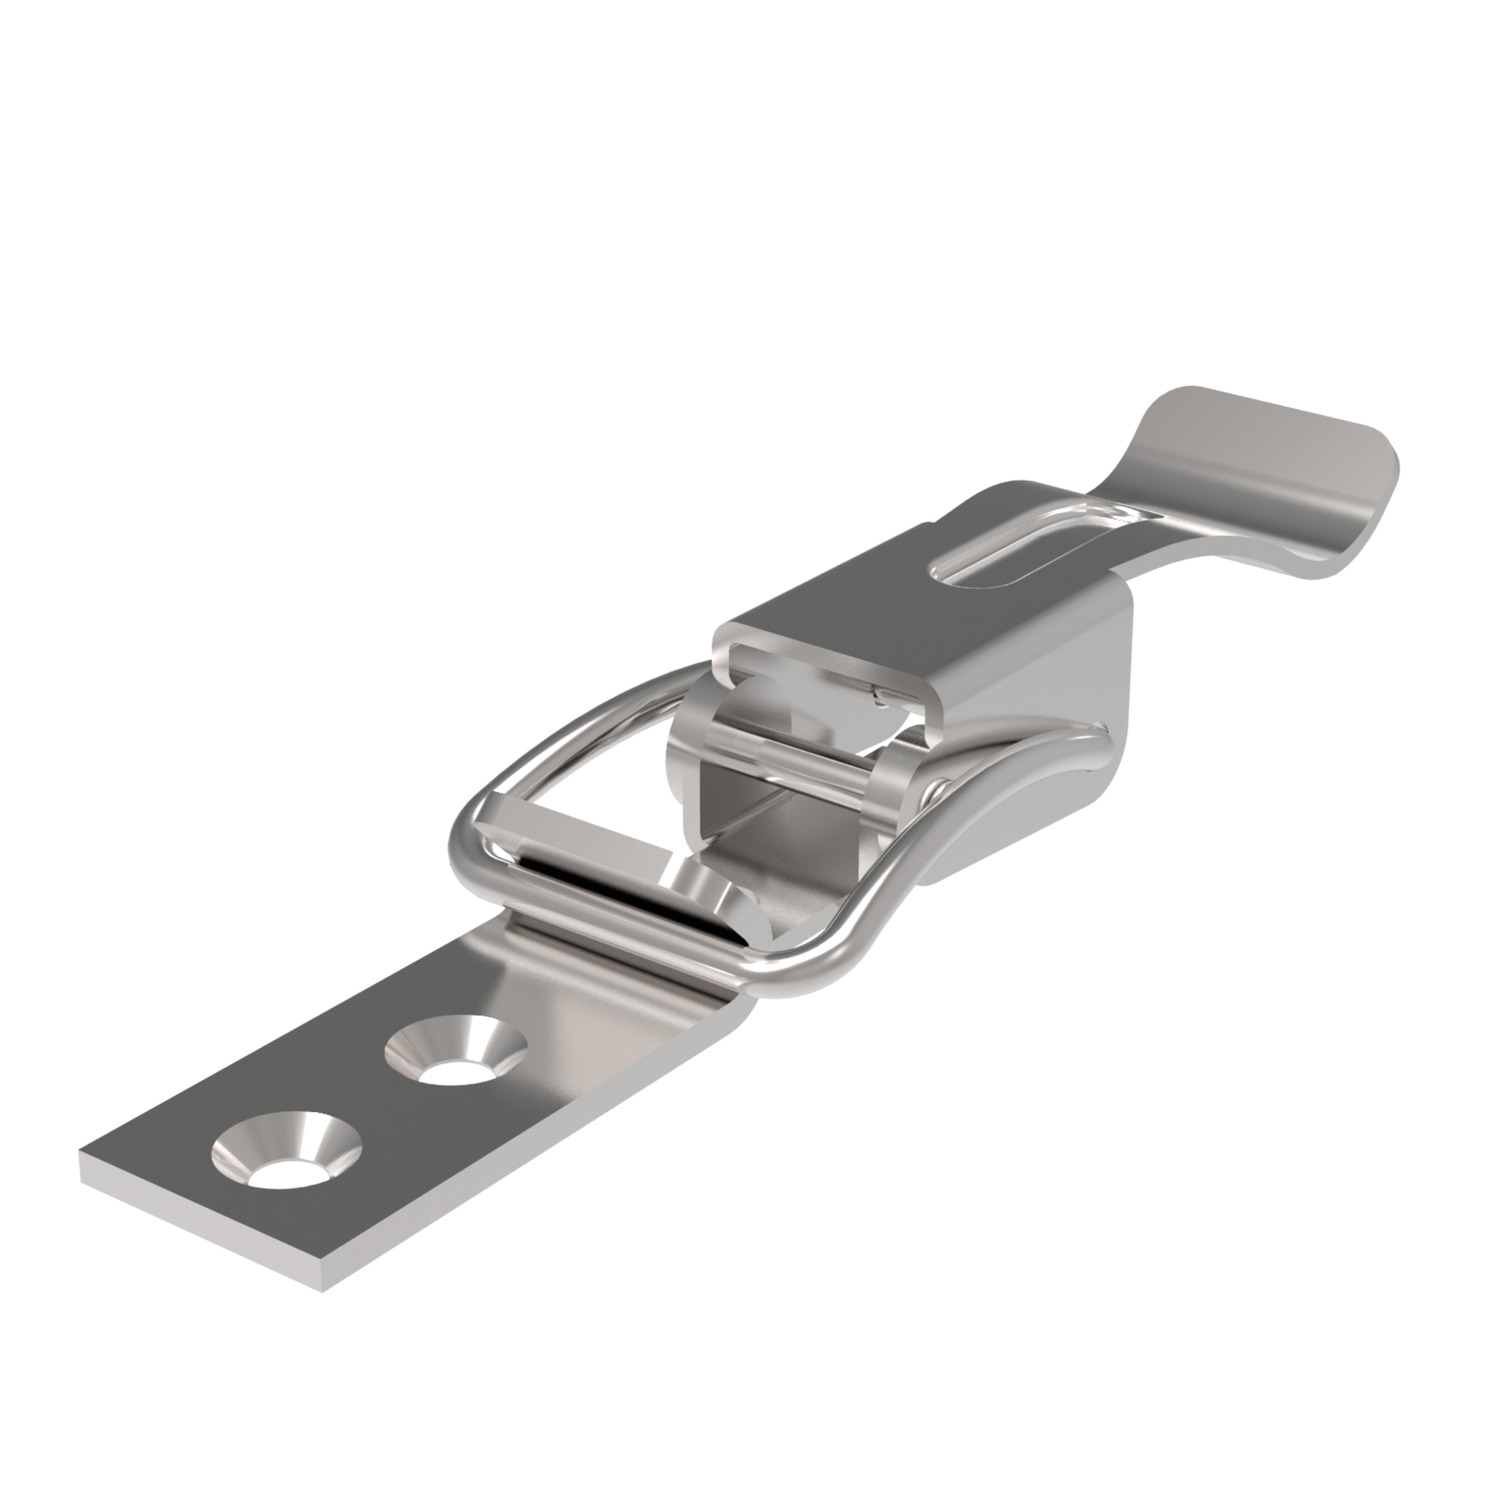 J0434.AC0030 Toggle Latches Stainless steel - 76,5 - 10,7 - 21